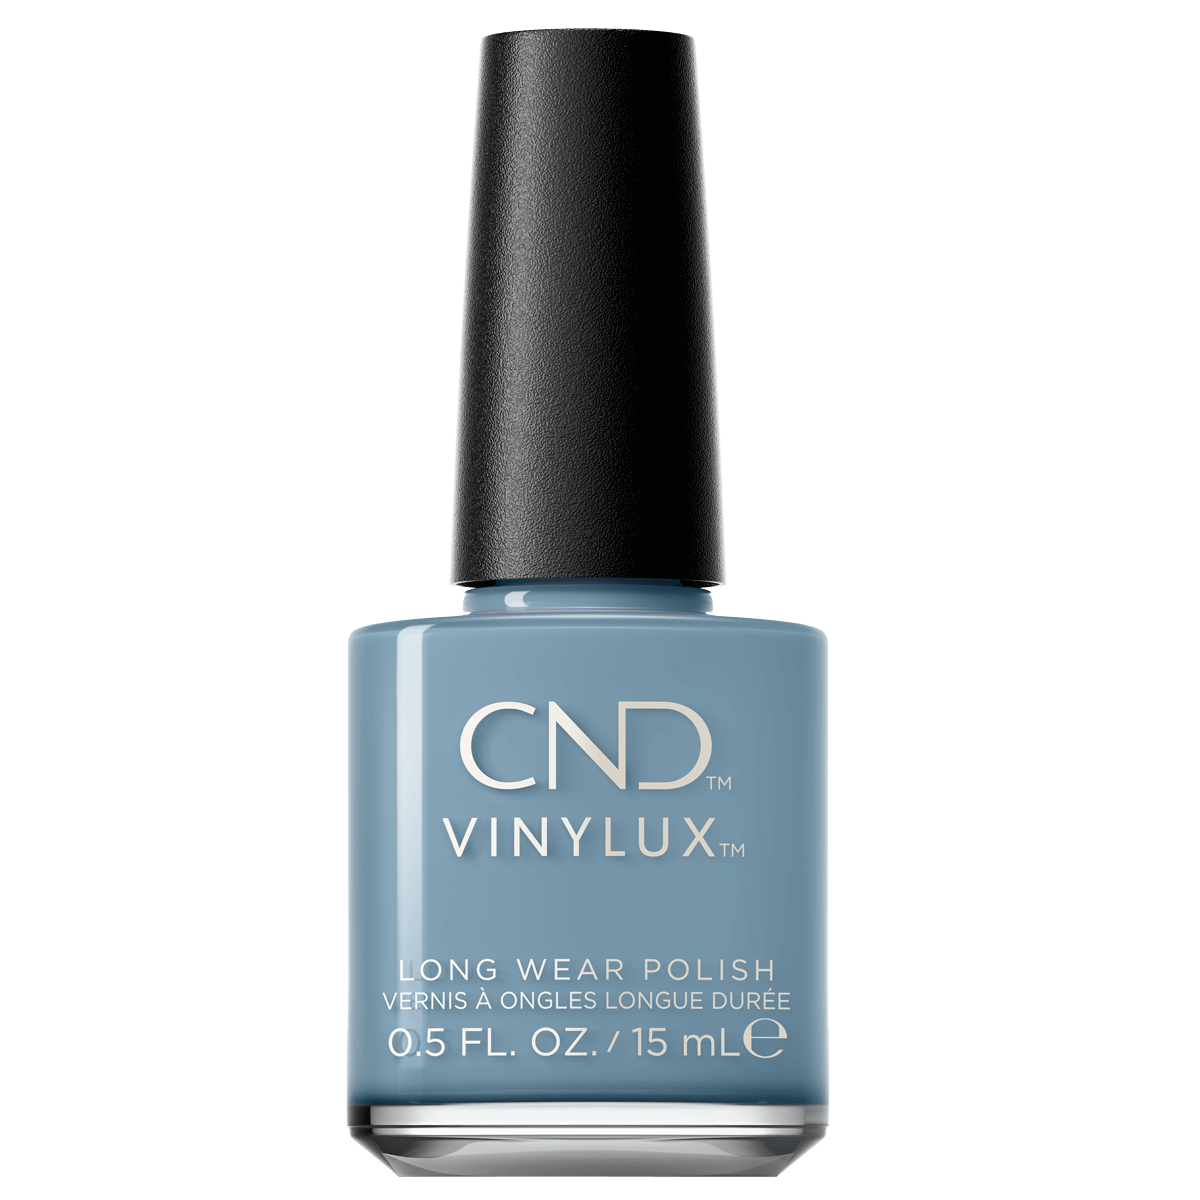 Vinylux CND Vernis à Ongles #432 Frosted Seaglass 15mL